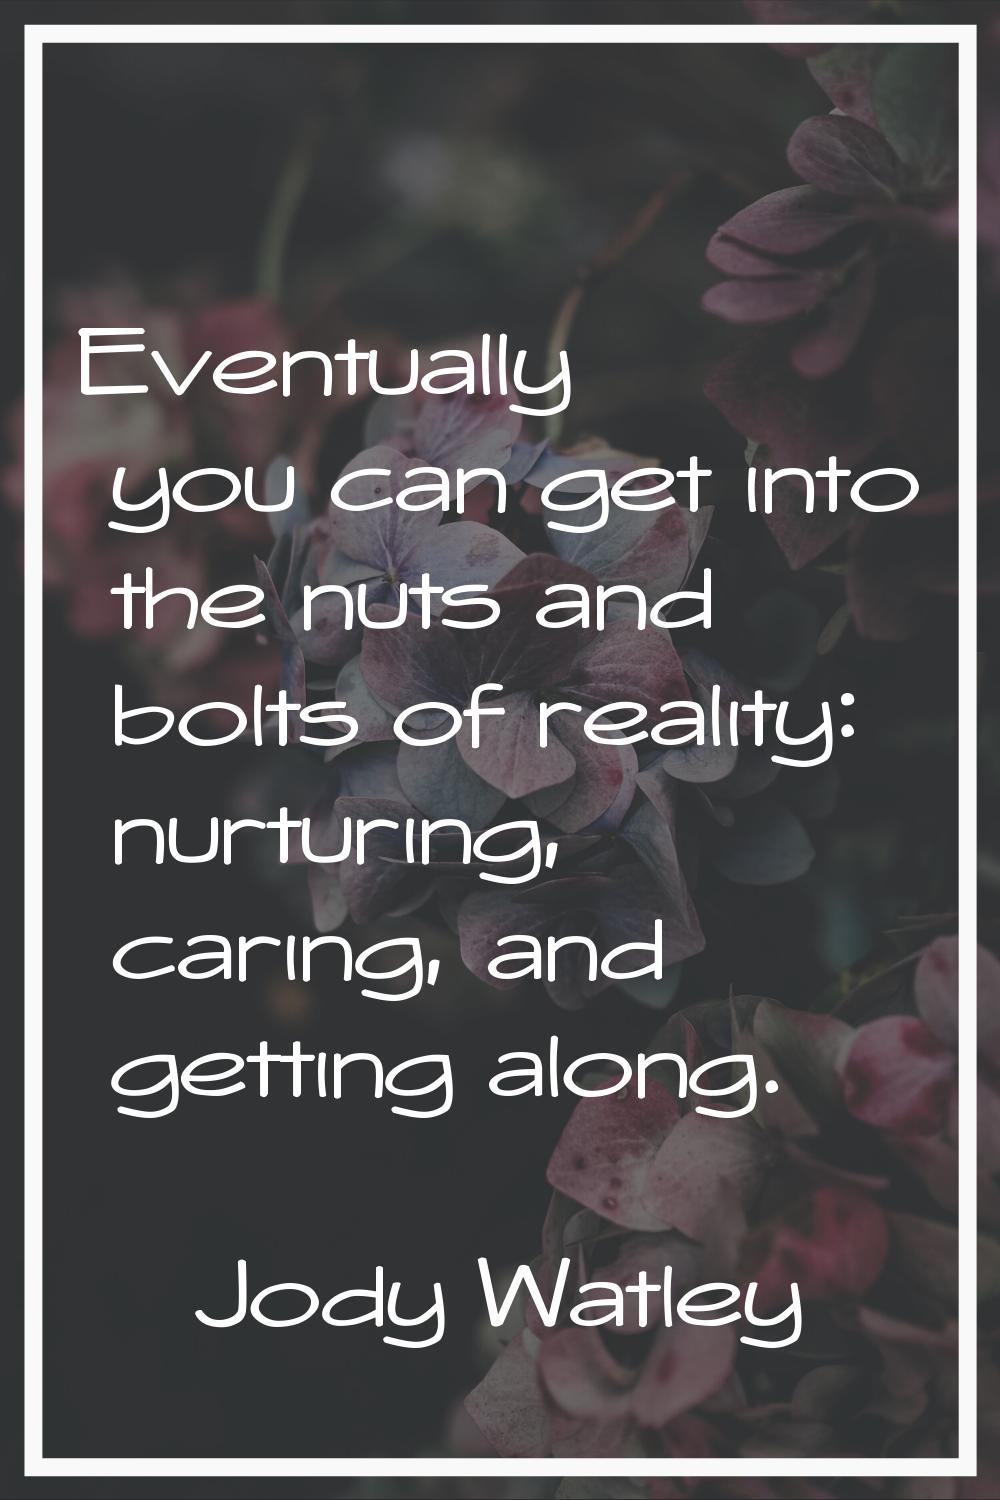 Eventually you can get into the nuts and bolts of reality: nurturing, caring, and getting along.